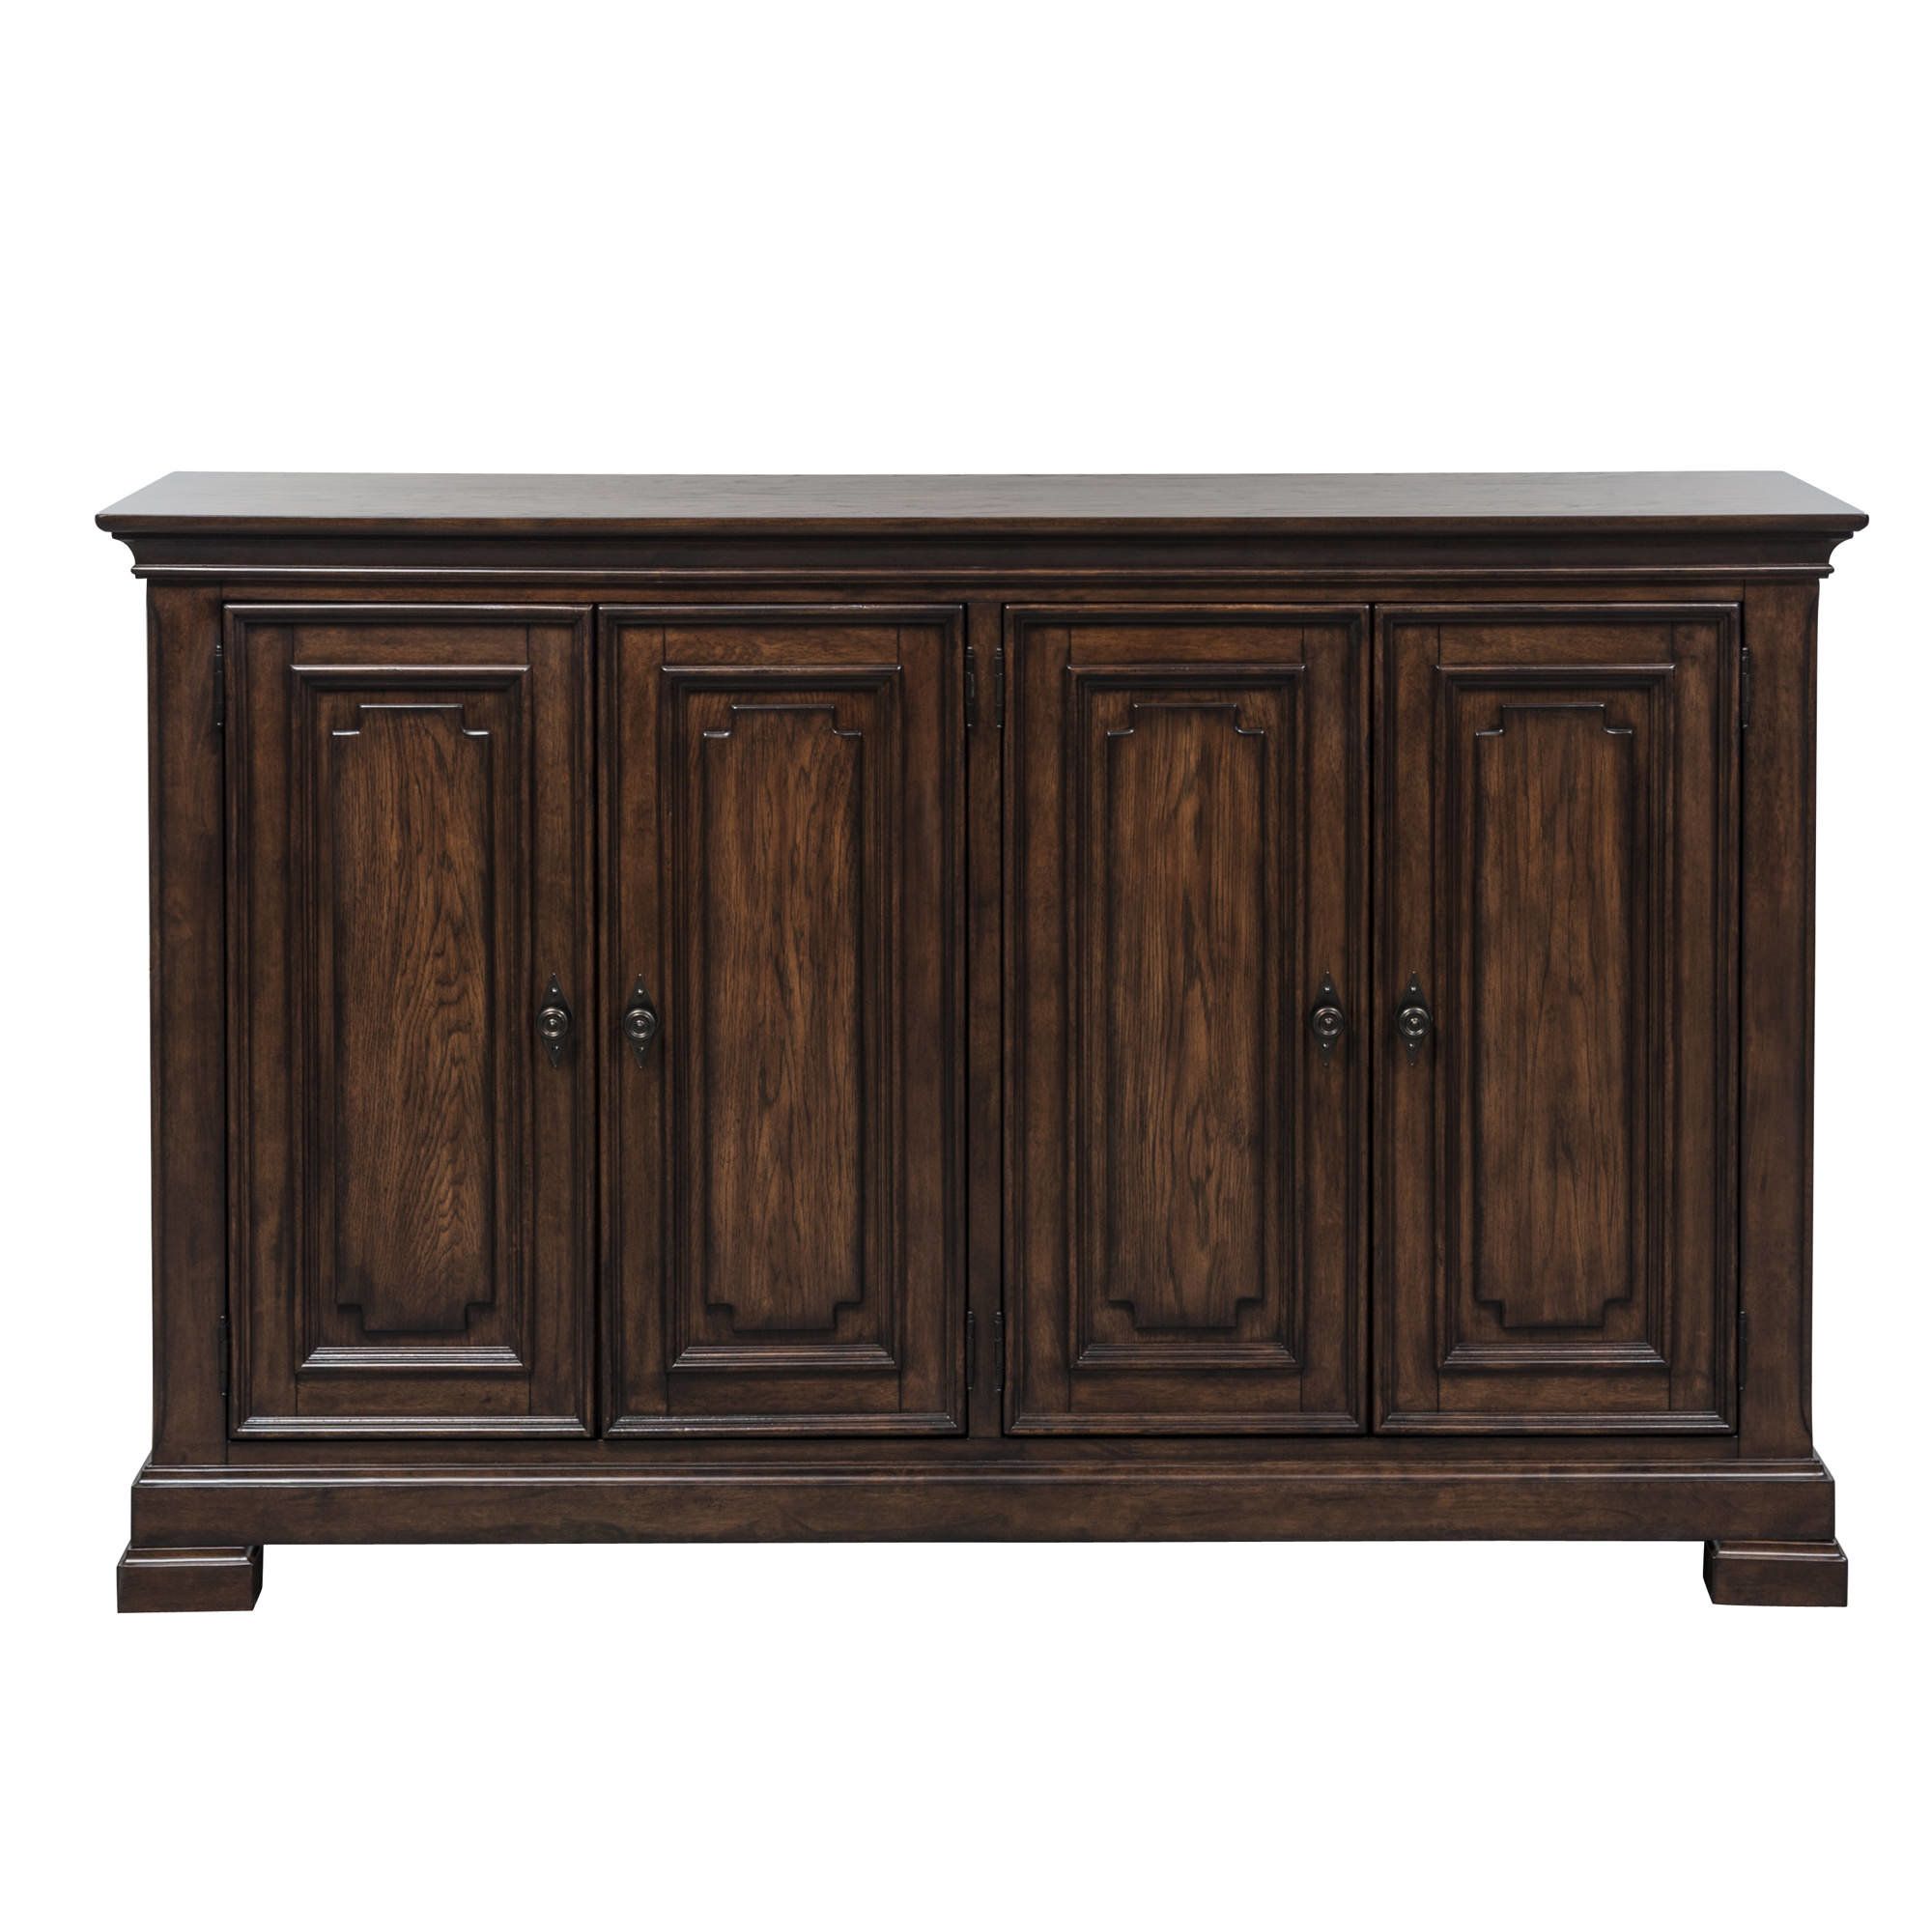 Tribeca Sideboard Throughout Best And Newest Lanesboro Sideboards (View 18 of 20)